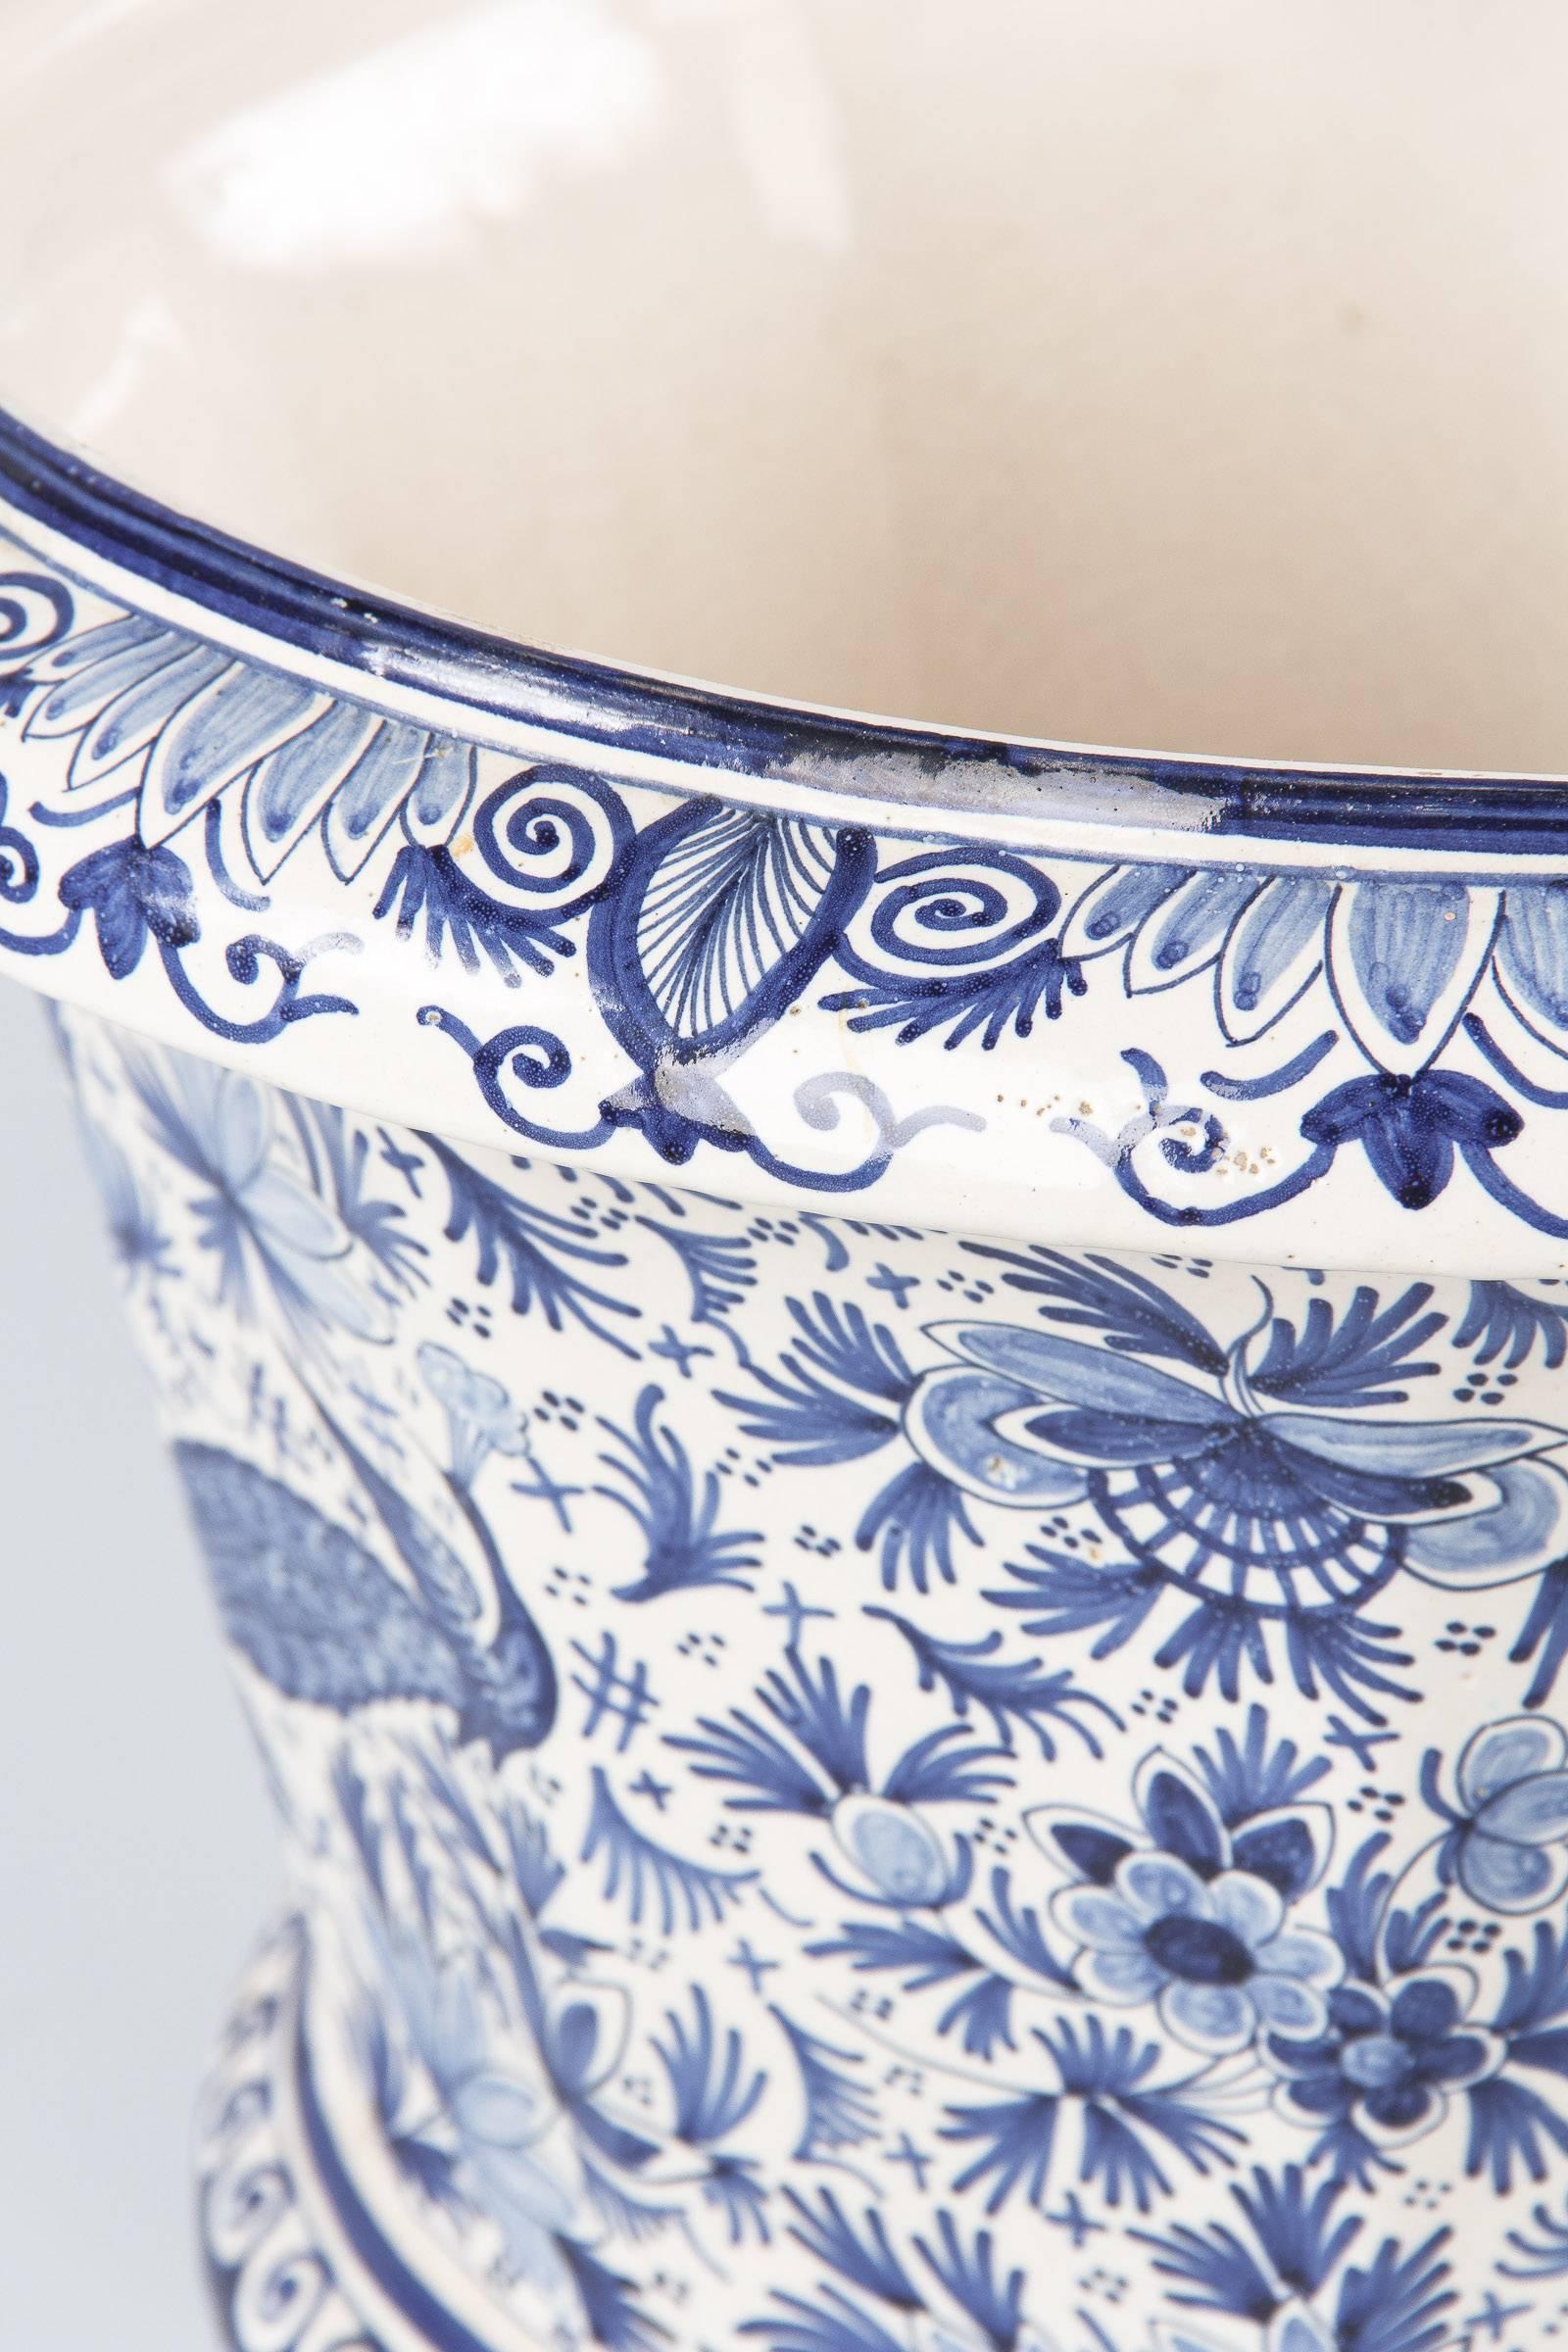 Hand-Painted 19th Century Blue and White Delft Ceramic Jardinière